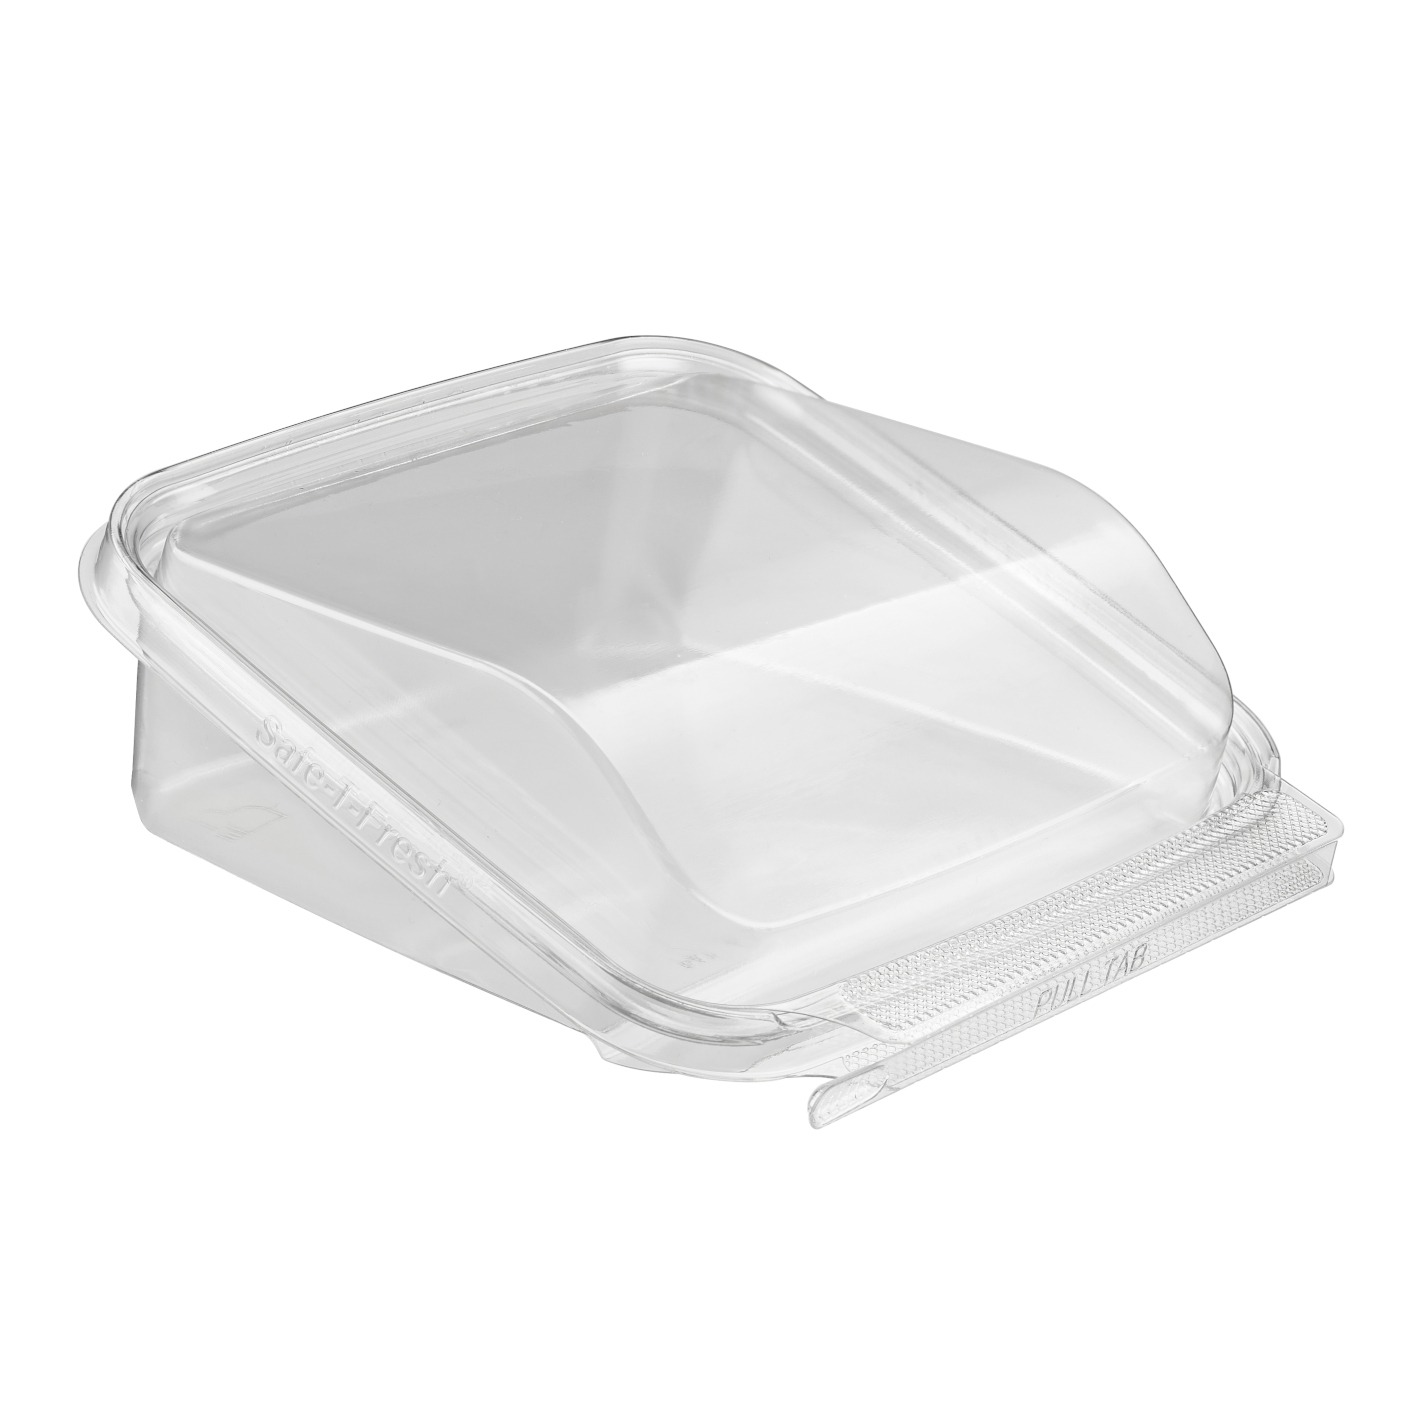 TSSWR Clear Tamper-Proof Wrap Container - 252